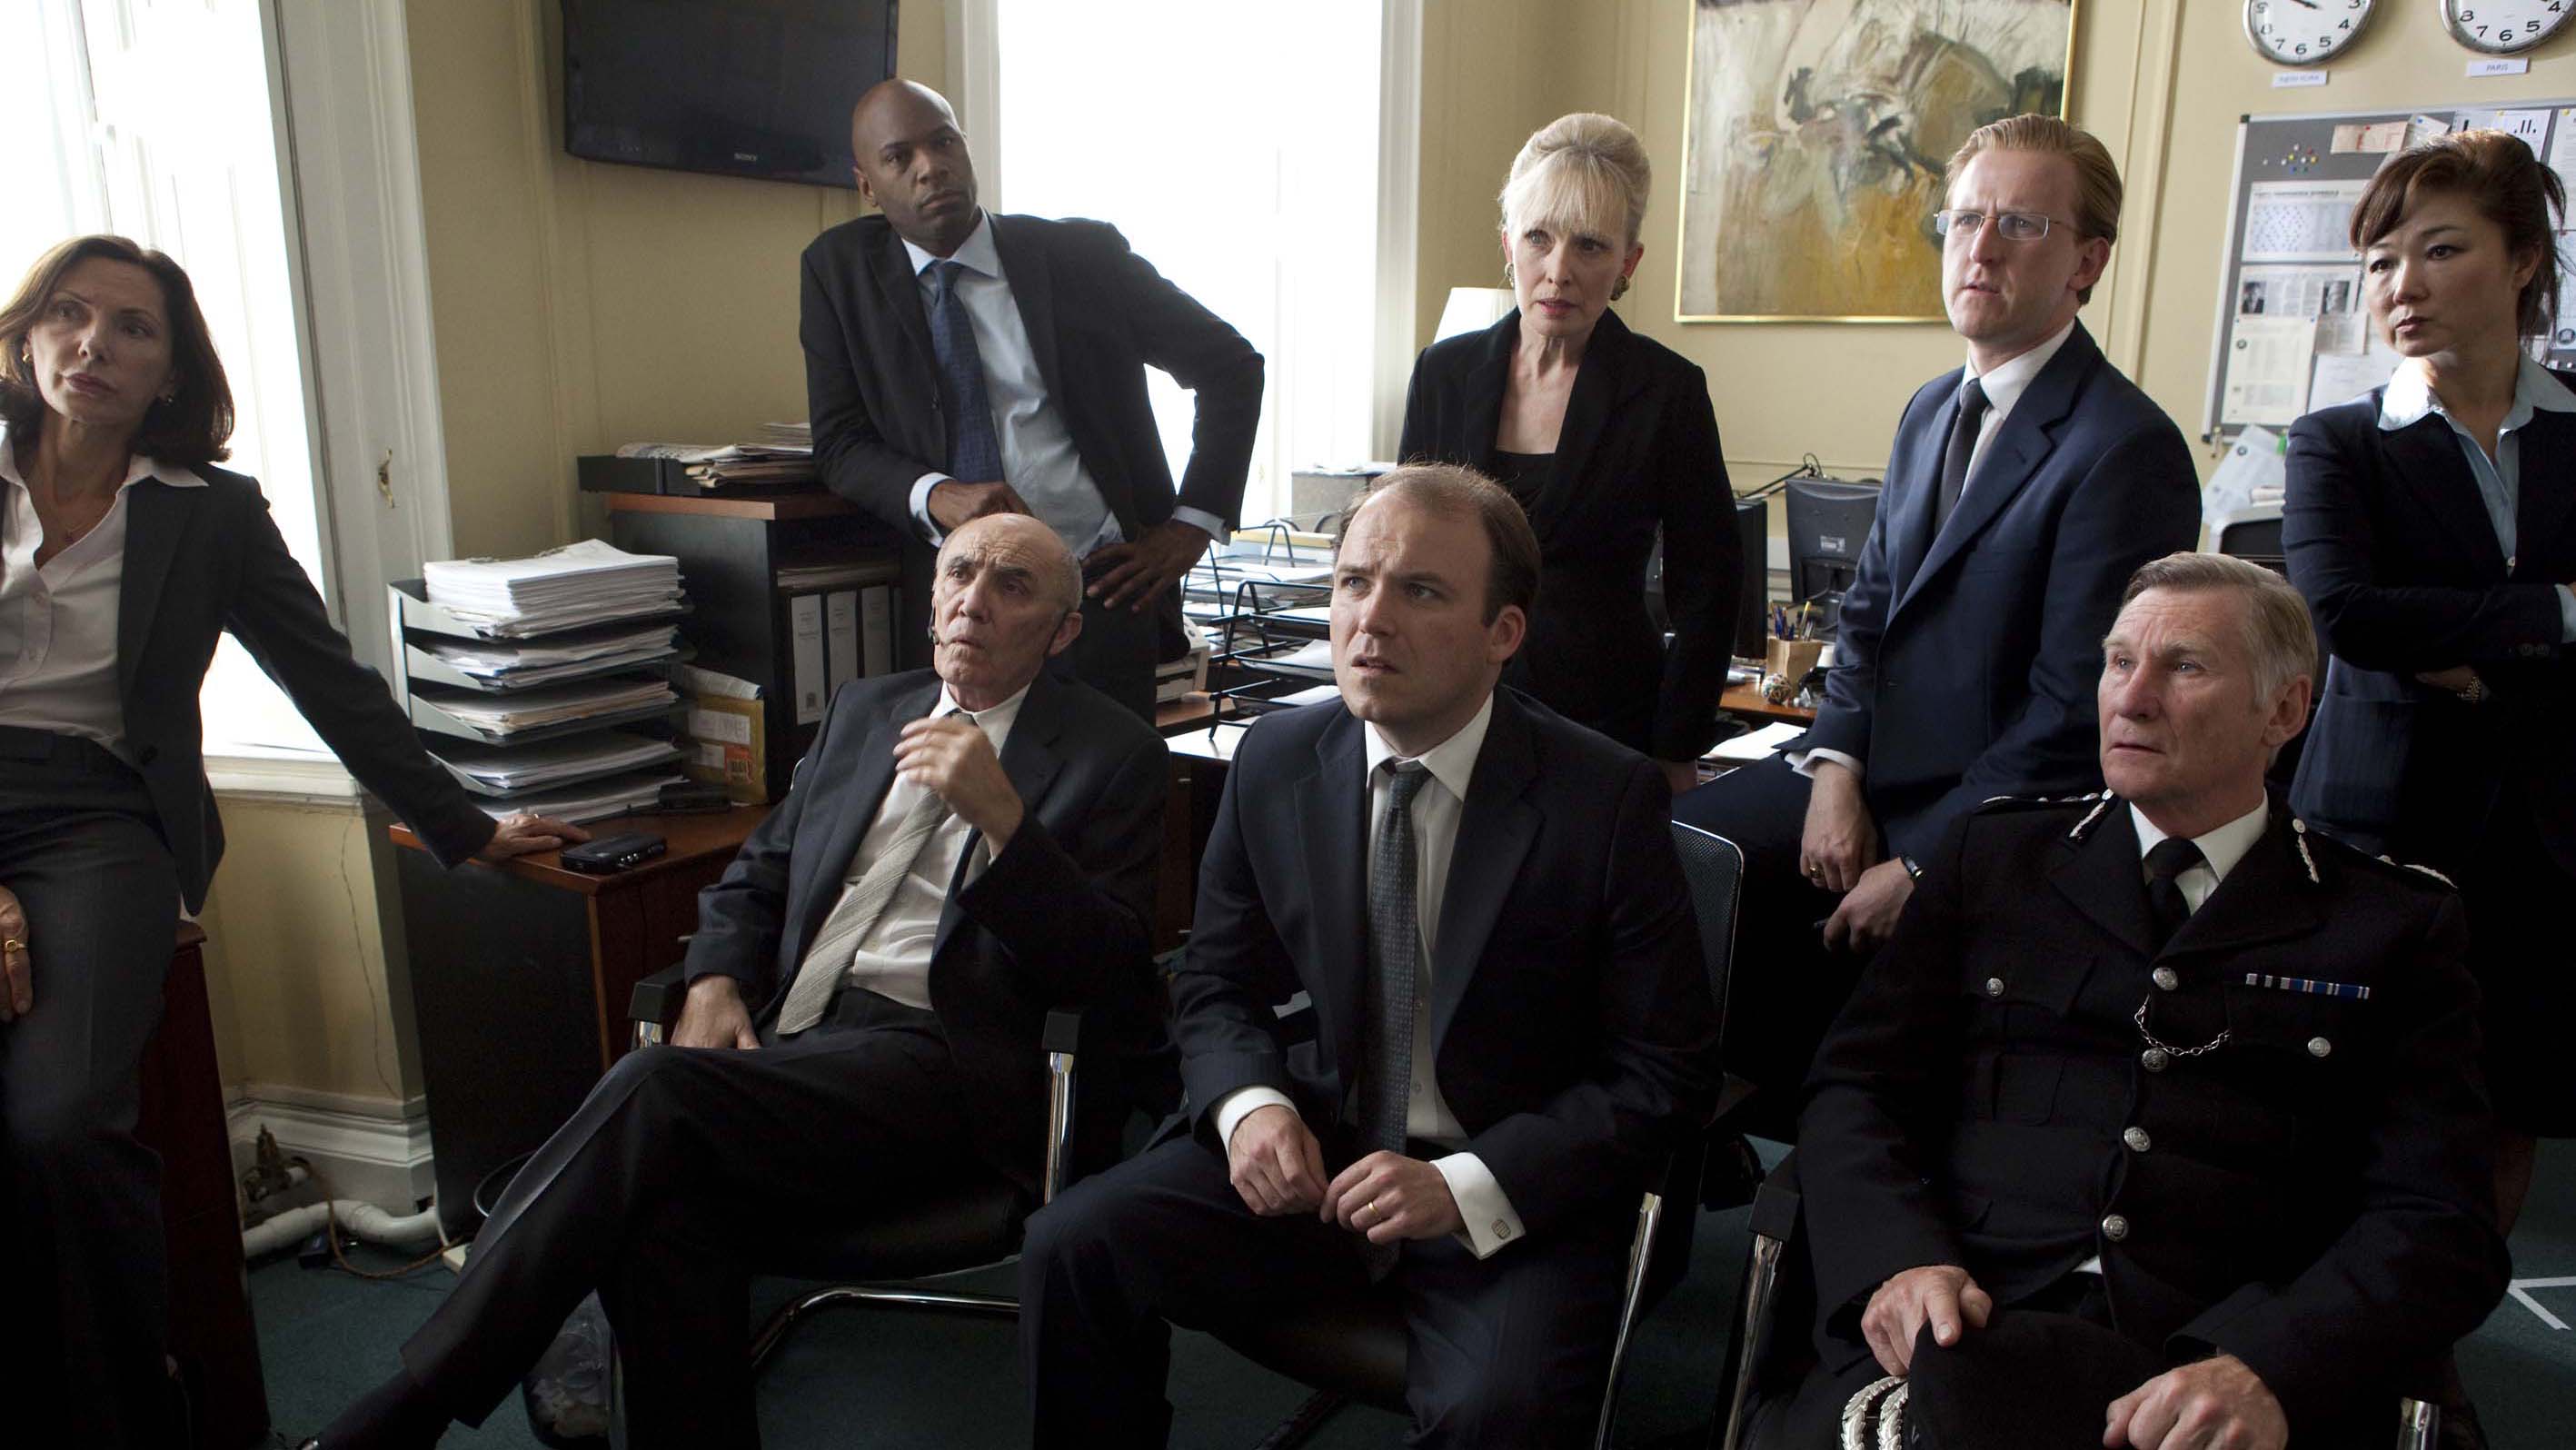 Rory Kinnear (center) as the aghast PM receiving his ransom demand in “The National Anthem.”